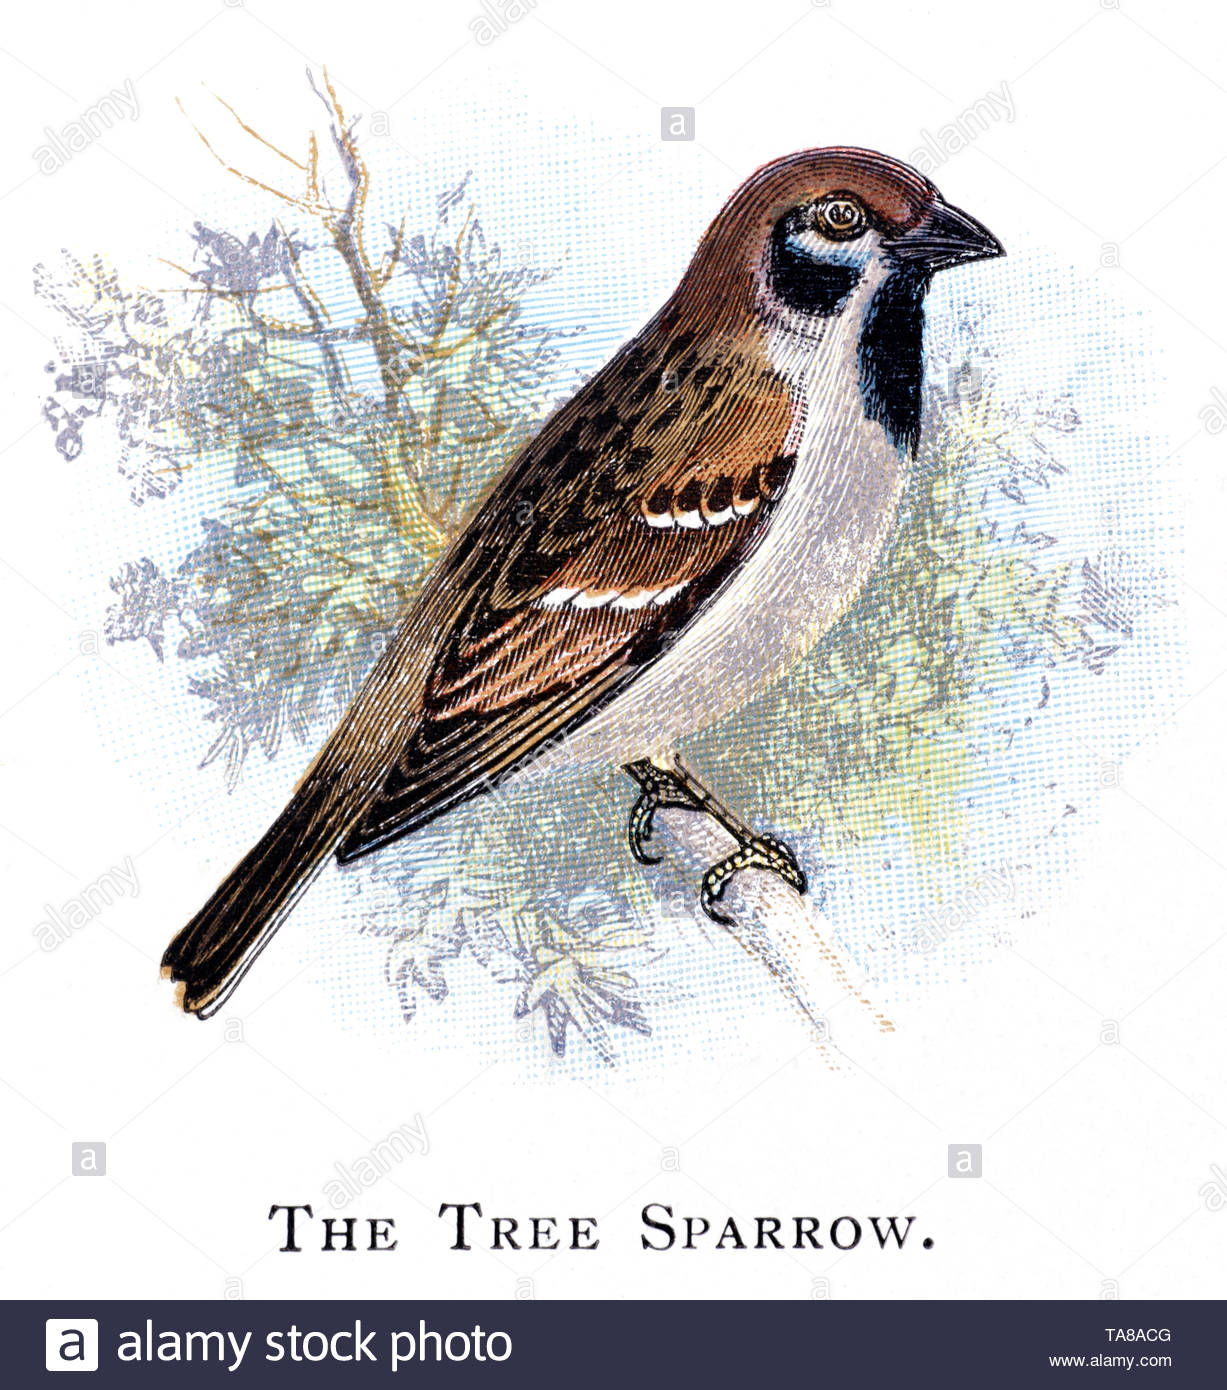 Tree Sparrow (Passer montanus), vintage illustration published in 1898 Stock Photo